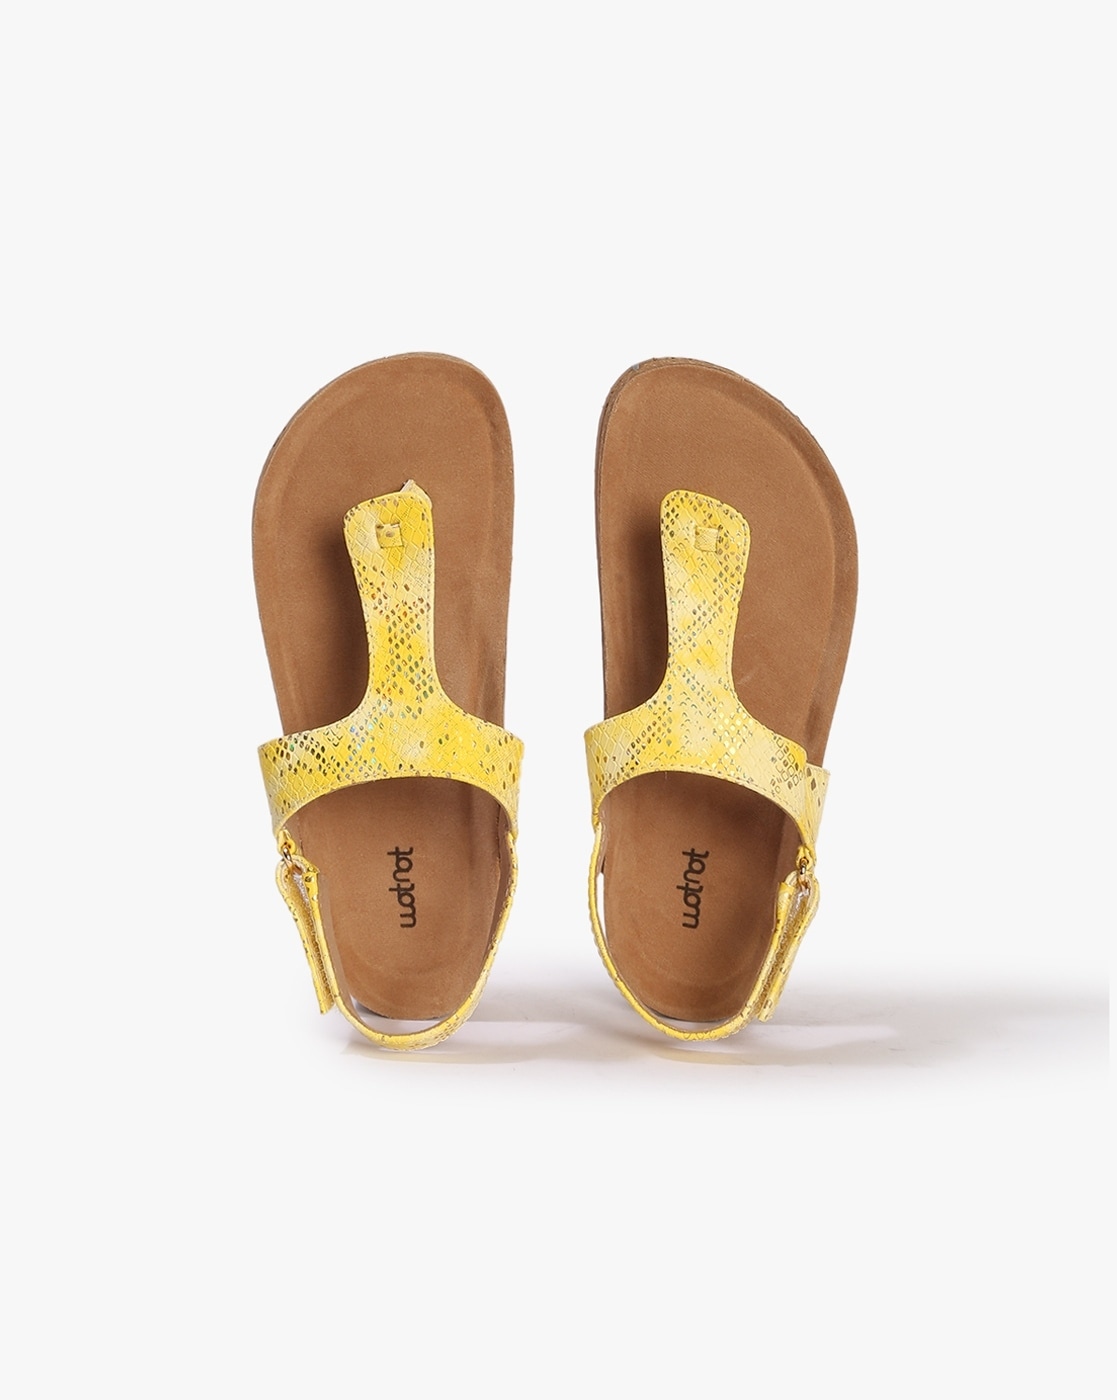 Quin Mustard Suede Flat Sandals | Yellow sandals, Mustard shoes, Womens  sandals